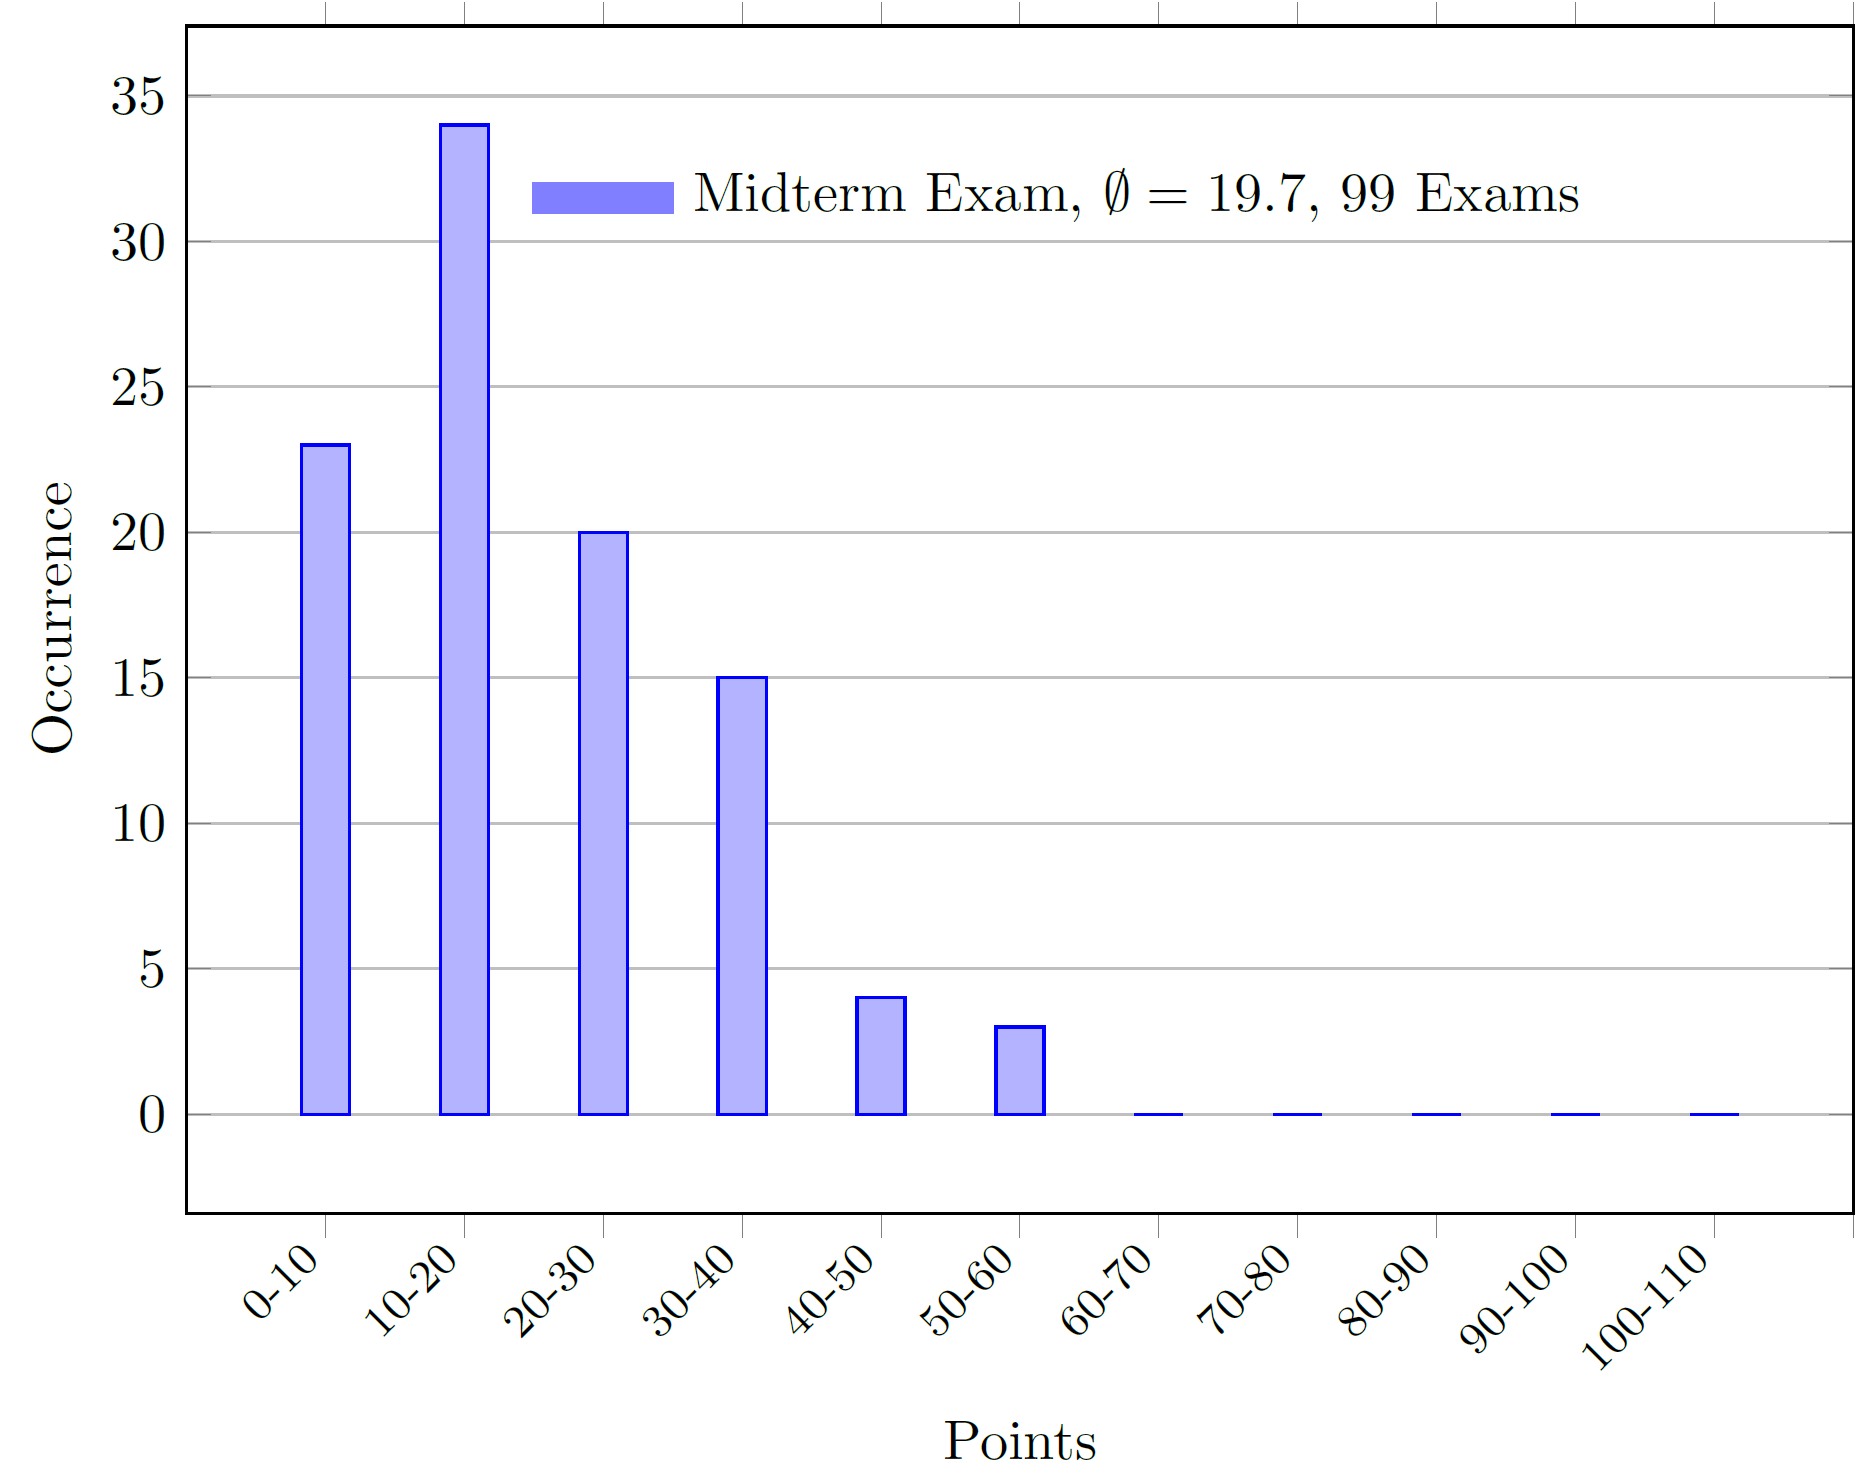 2nd Midterm Exam - Results